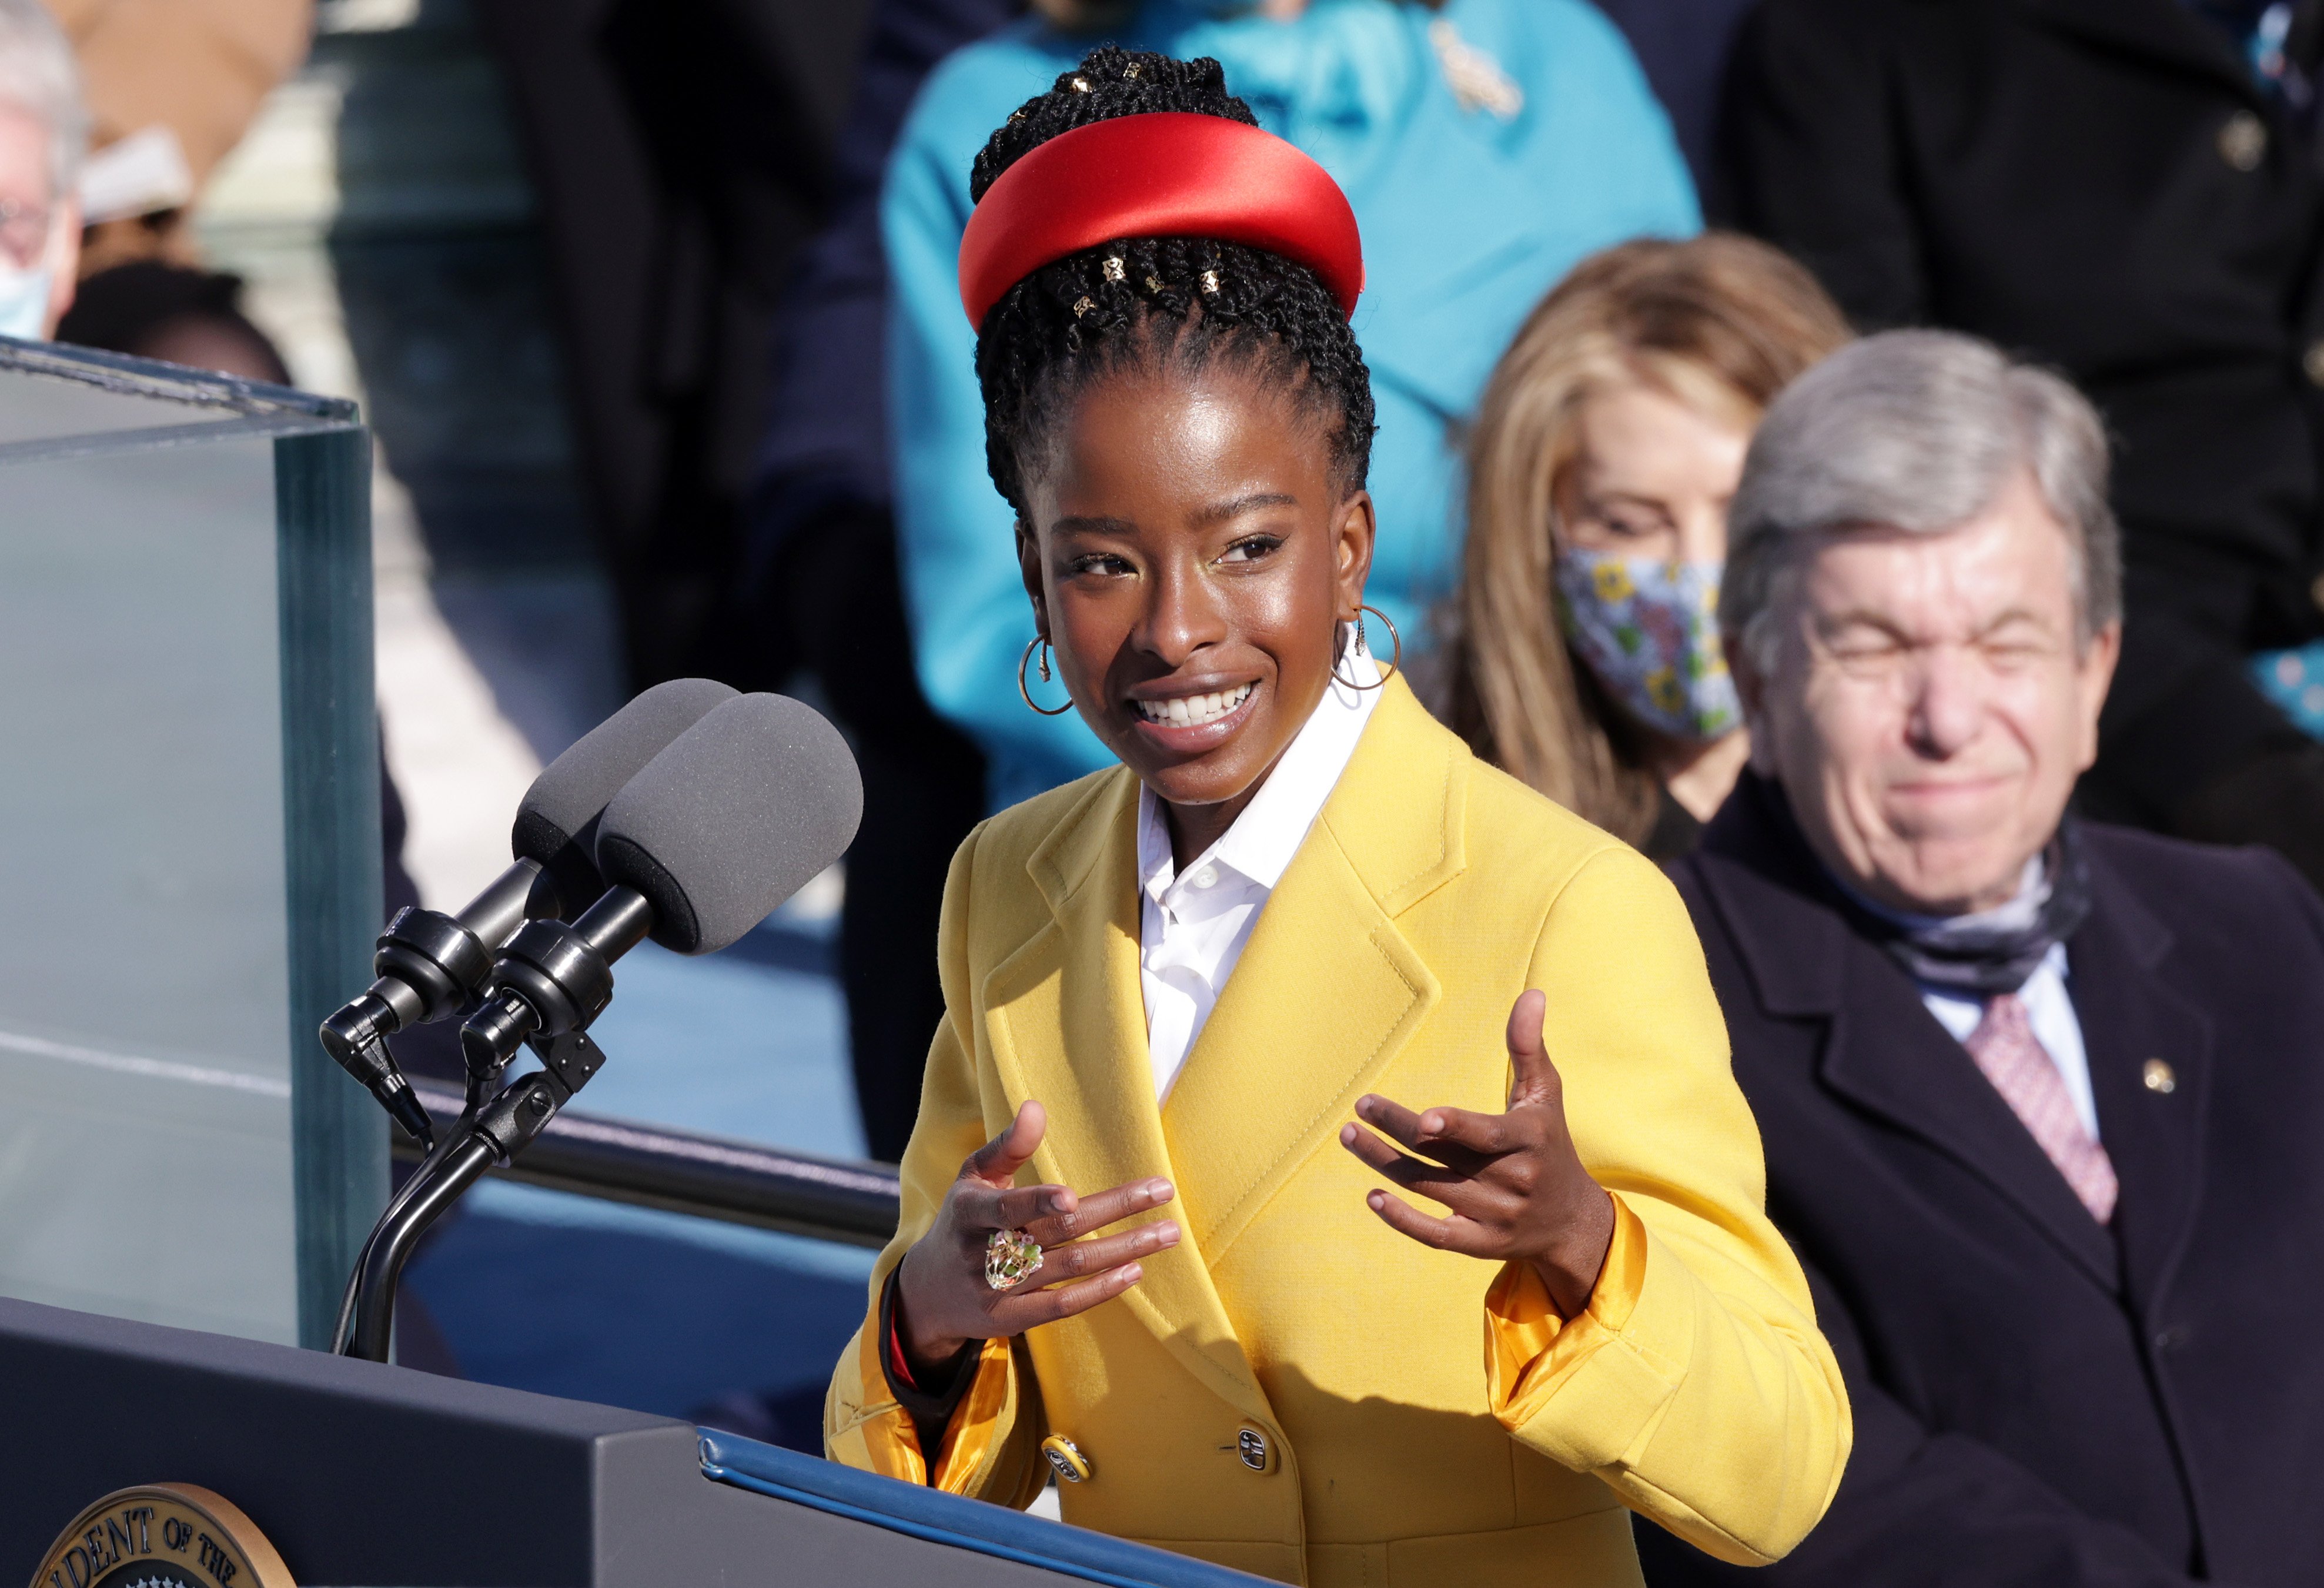 Amanda Gorman wearing a stunning yellow coat during the Presidential Inauguration on January 20, 2021. | Photo: Getty Images